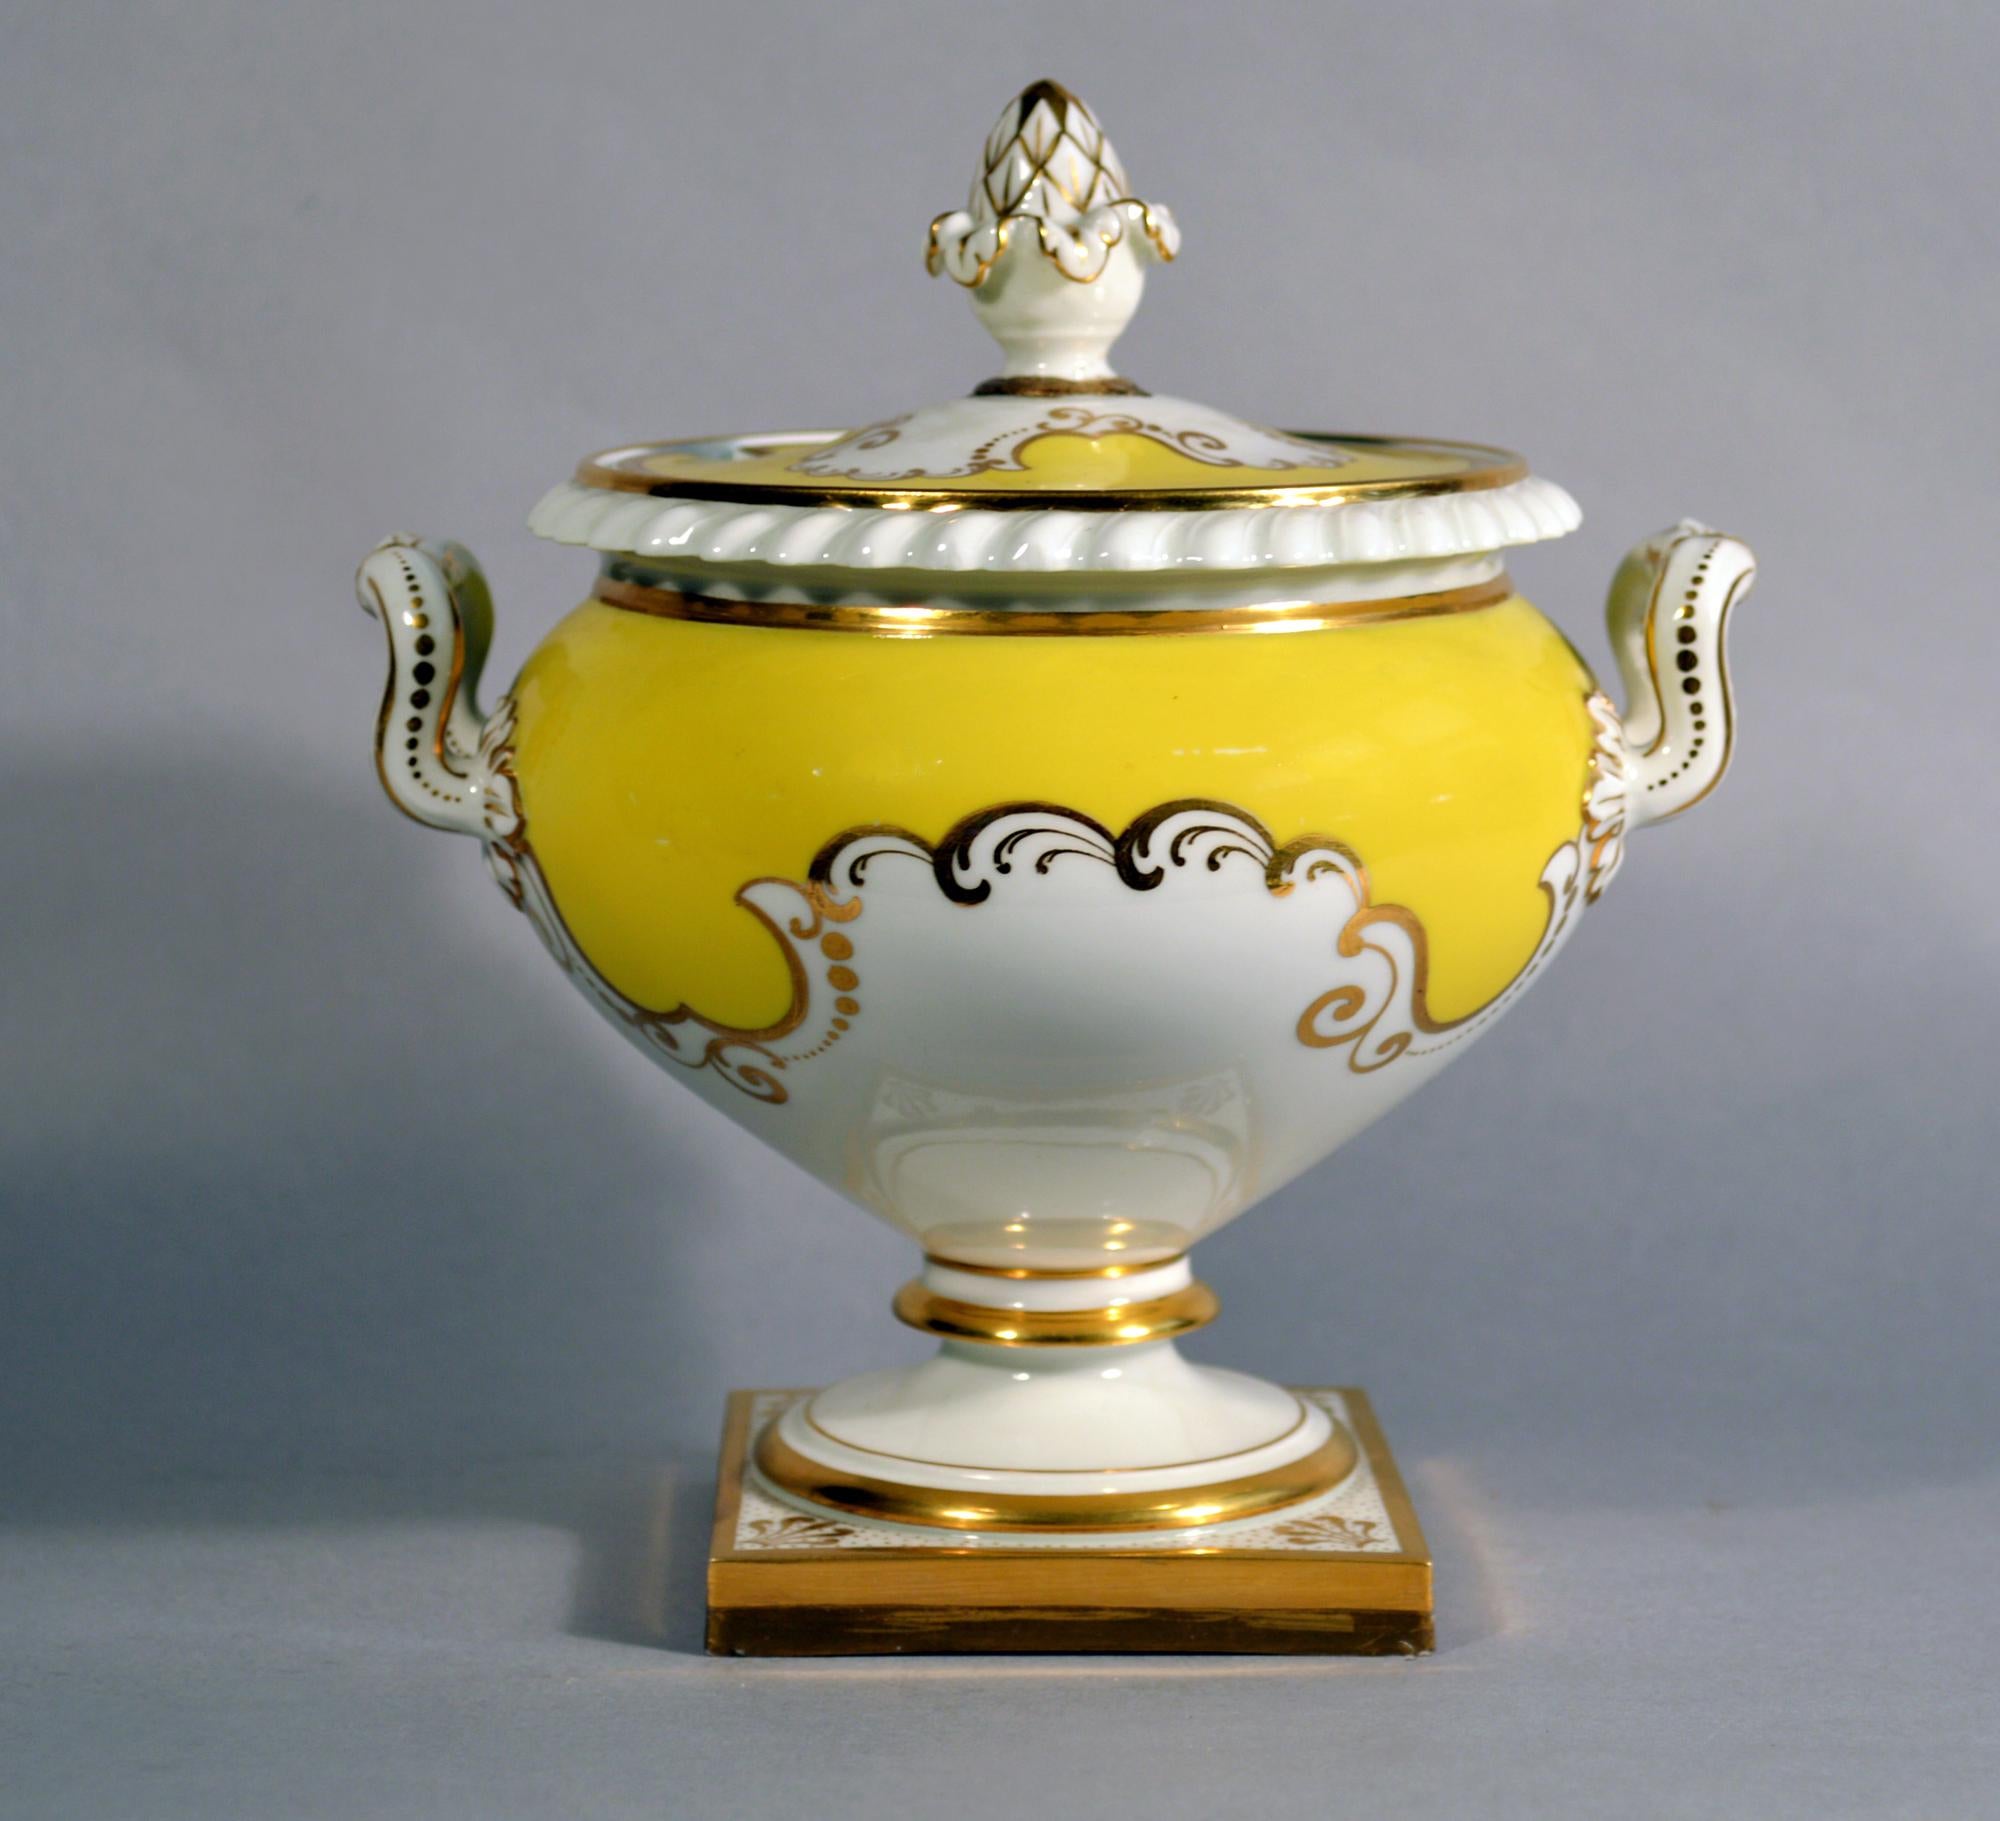 Flight, Barr & Barr Worcester Porcelain Yellow Sauce Tureen and Cover,
circa 1825.

The tureen is painted with a yellow ground and gilt scrollwork and is raised on a square base with each corner painted with a gilt shell. The tureen with shaped